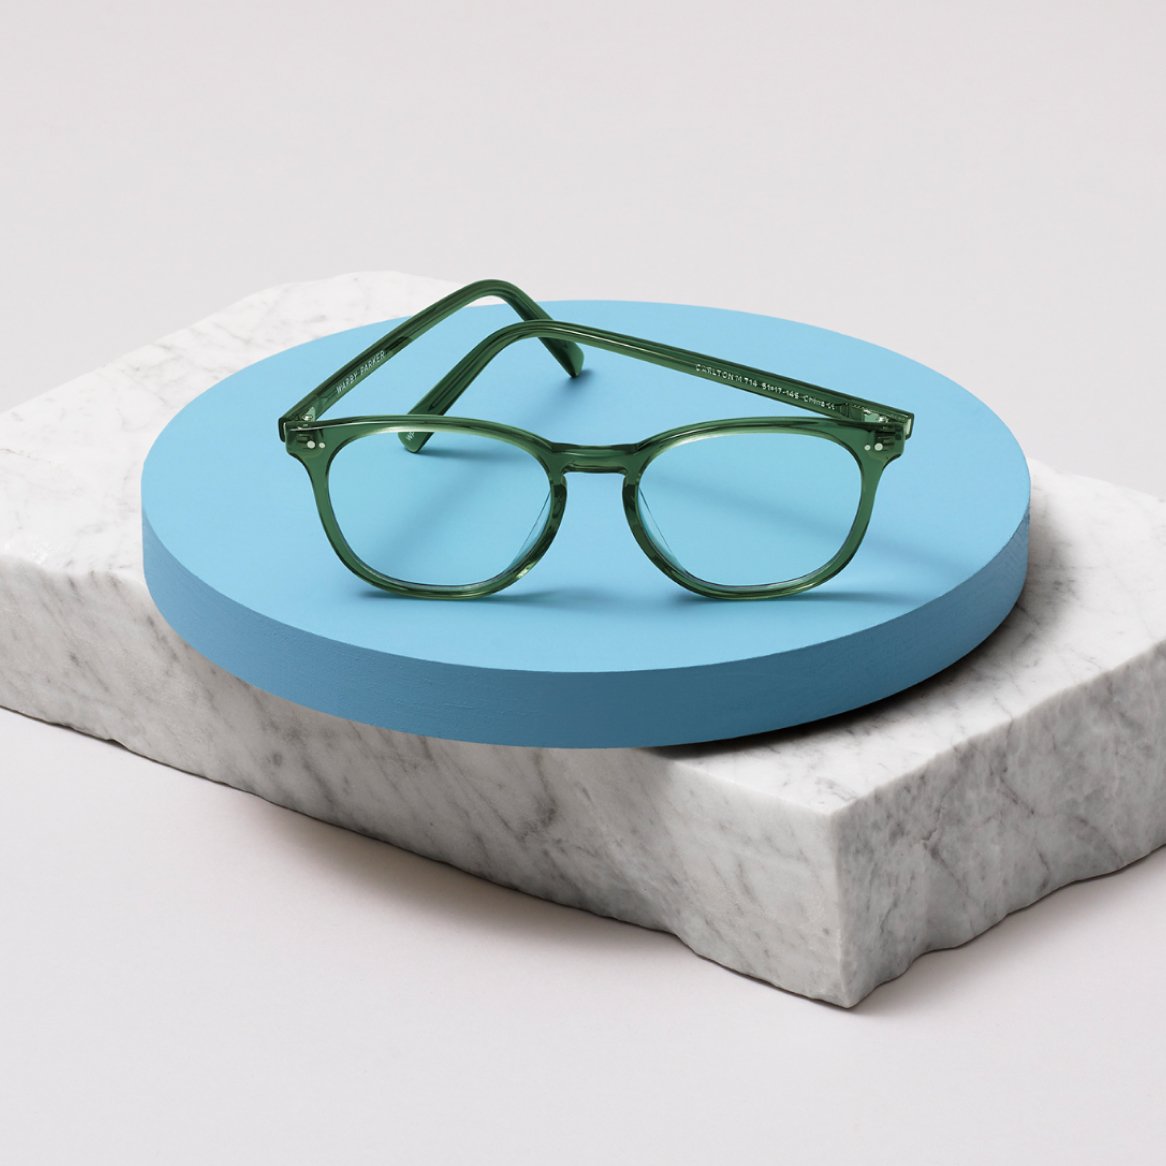 A pair of new glasses displayed on a block